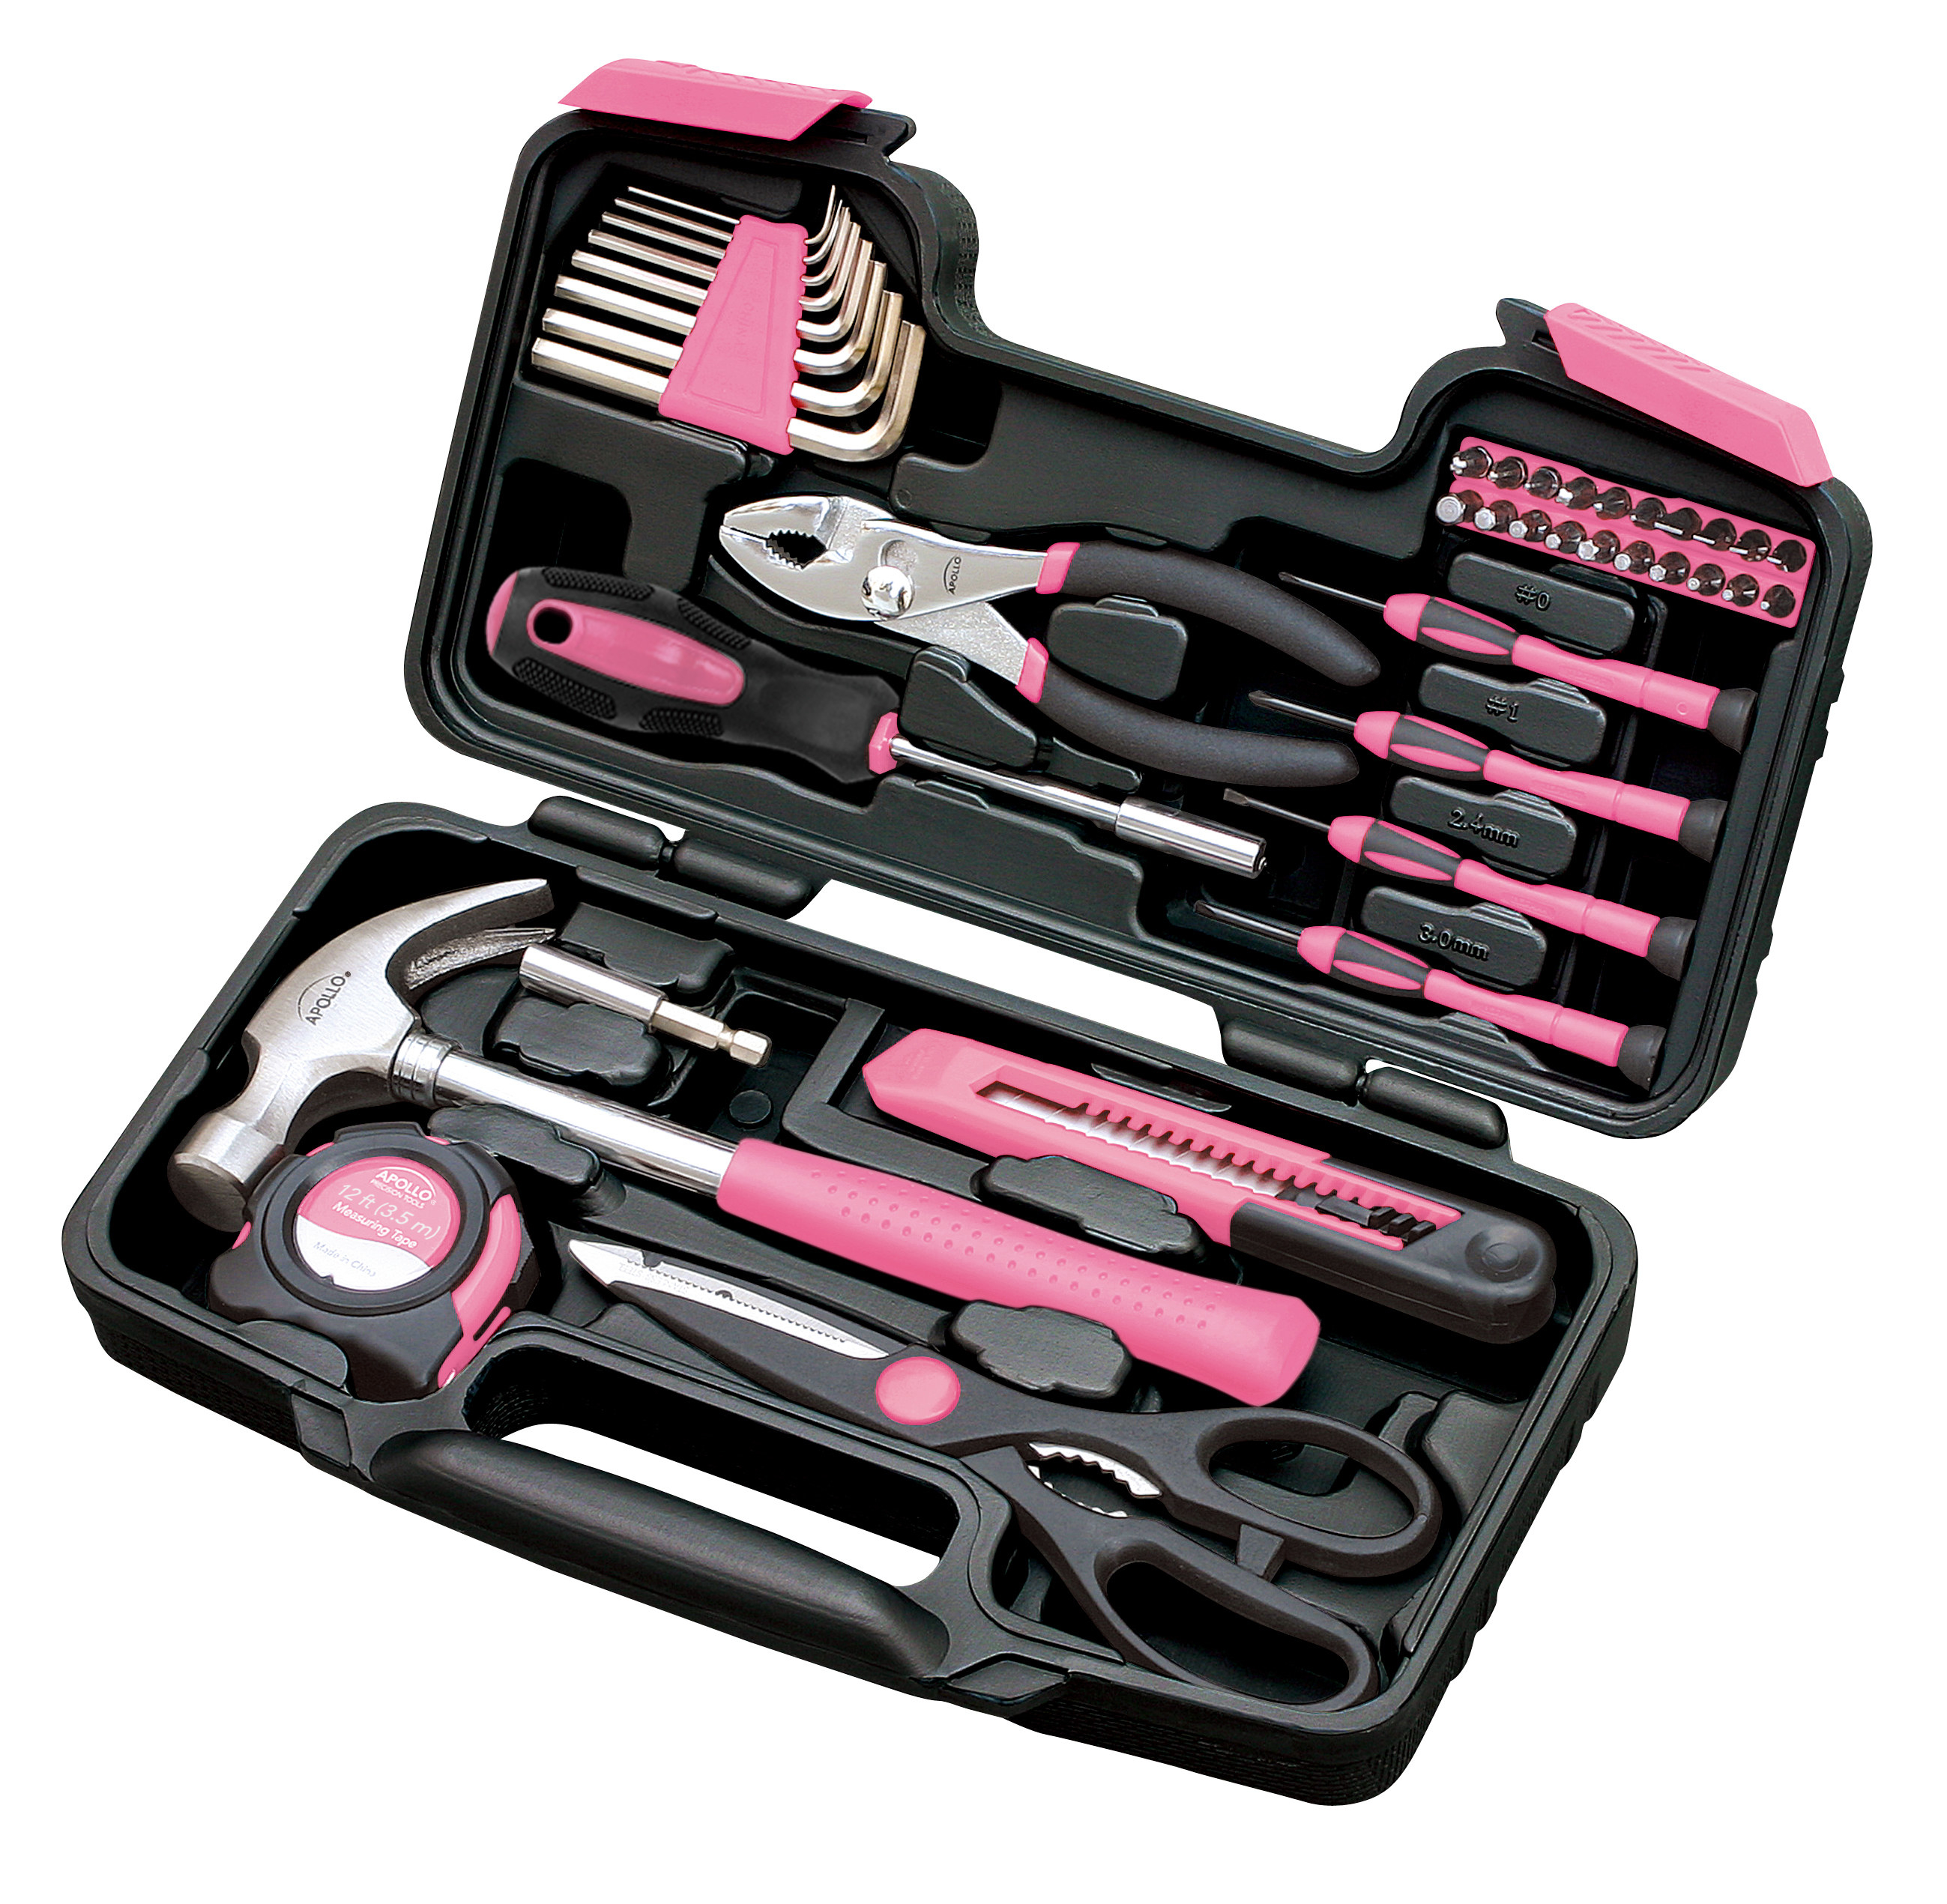 39-piece pink tool kit in a black carrying case